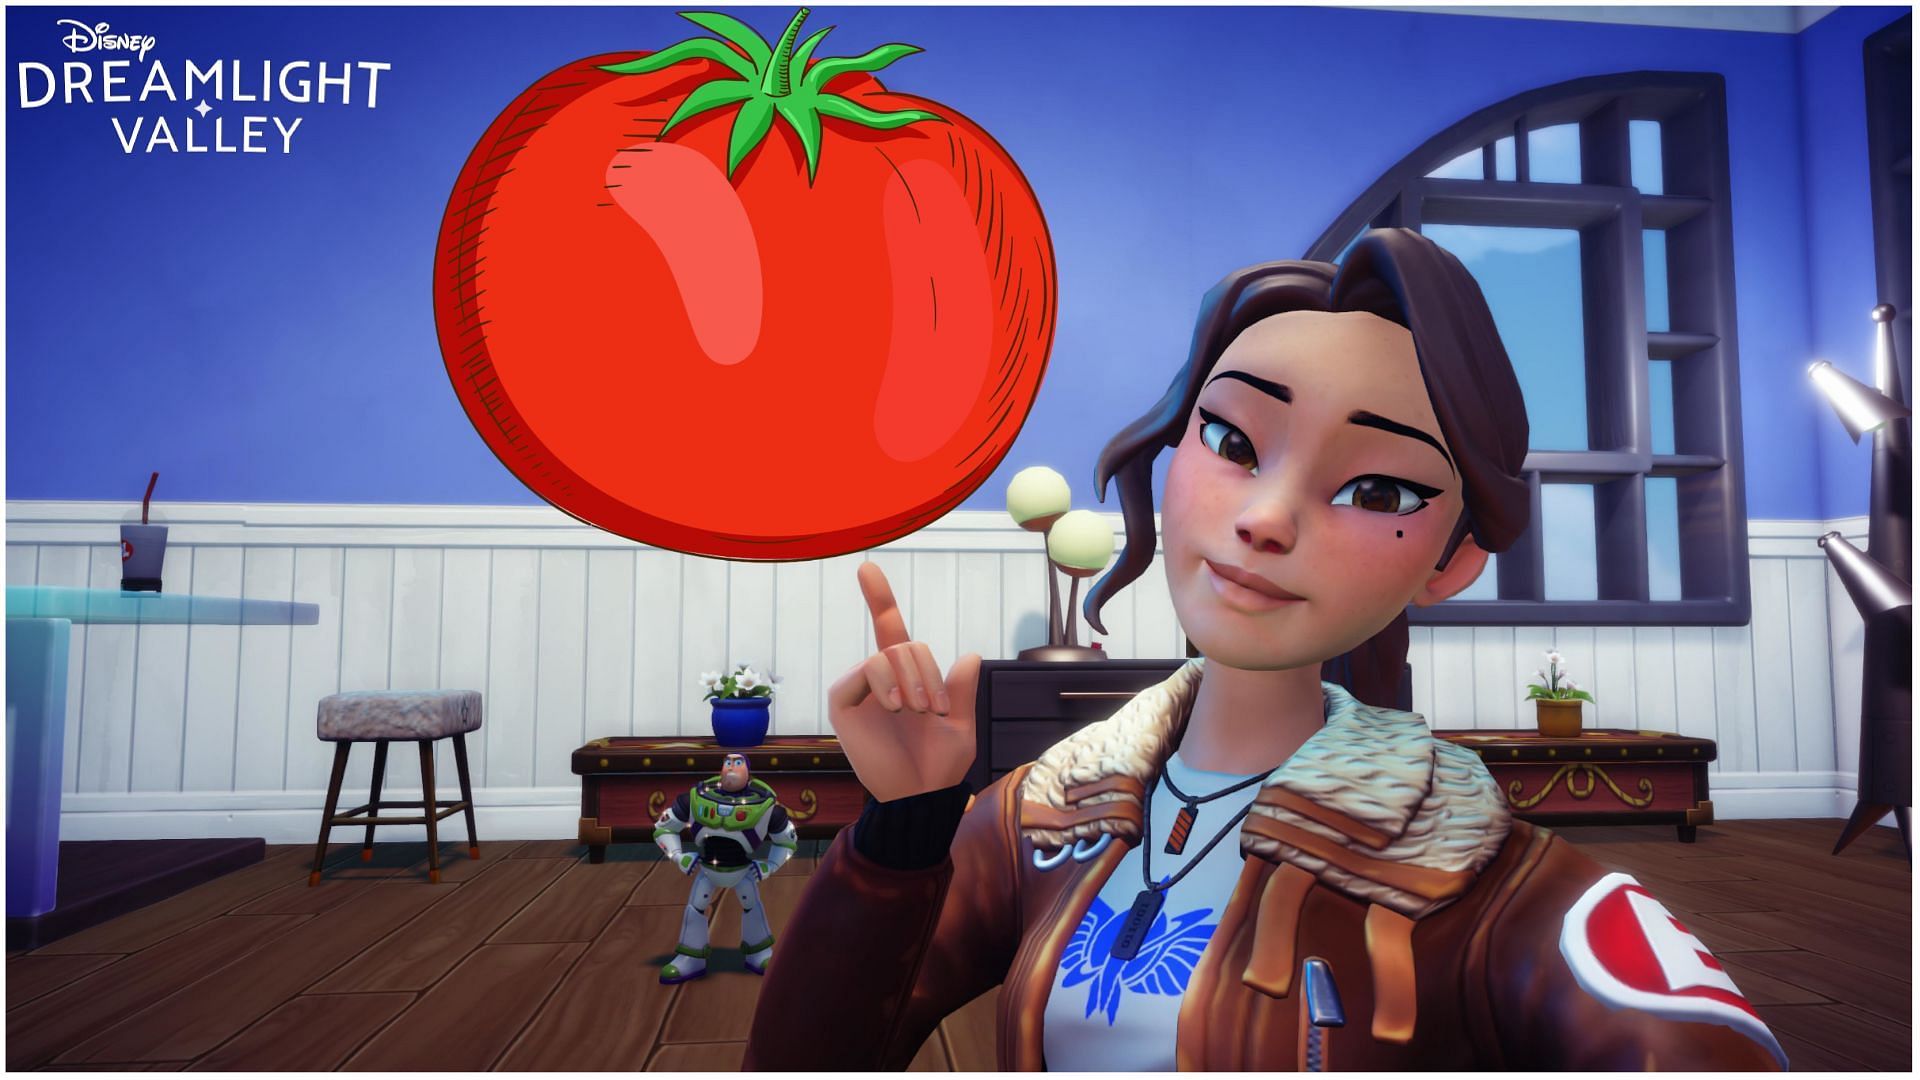 Tomatoes are a vital cooking ingredient in Disney Dreamlight Valley (Image via Gameloft)